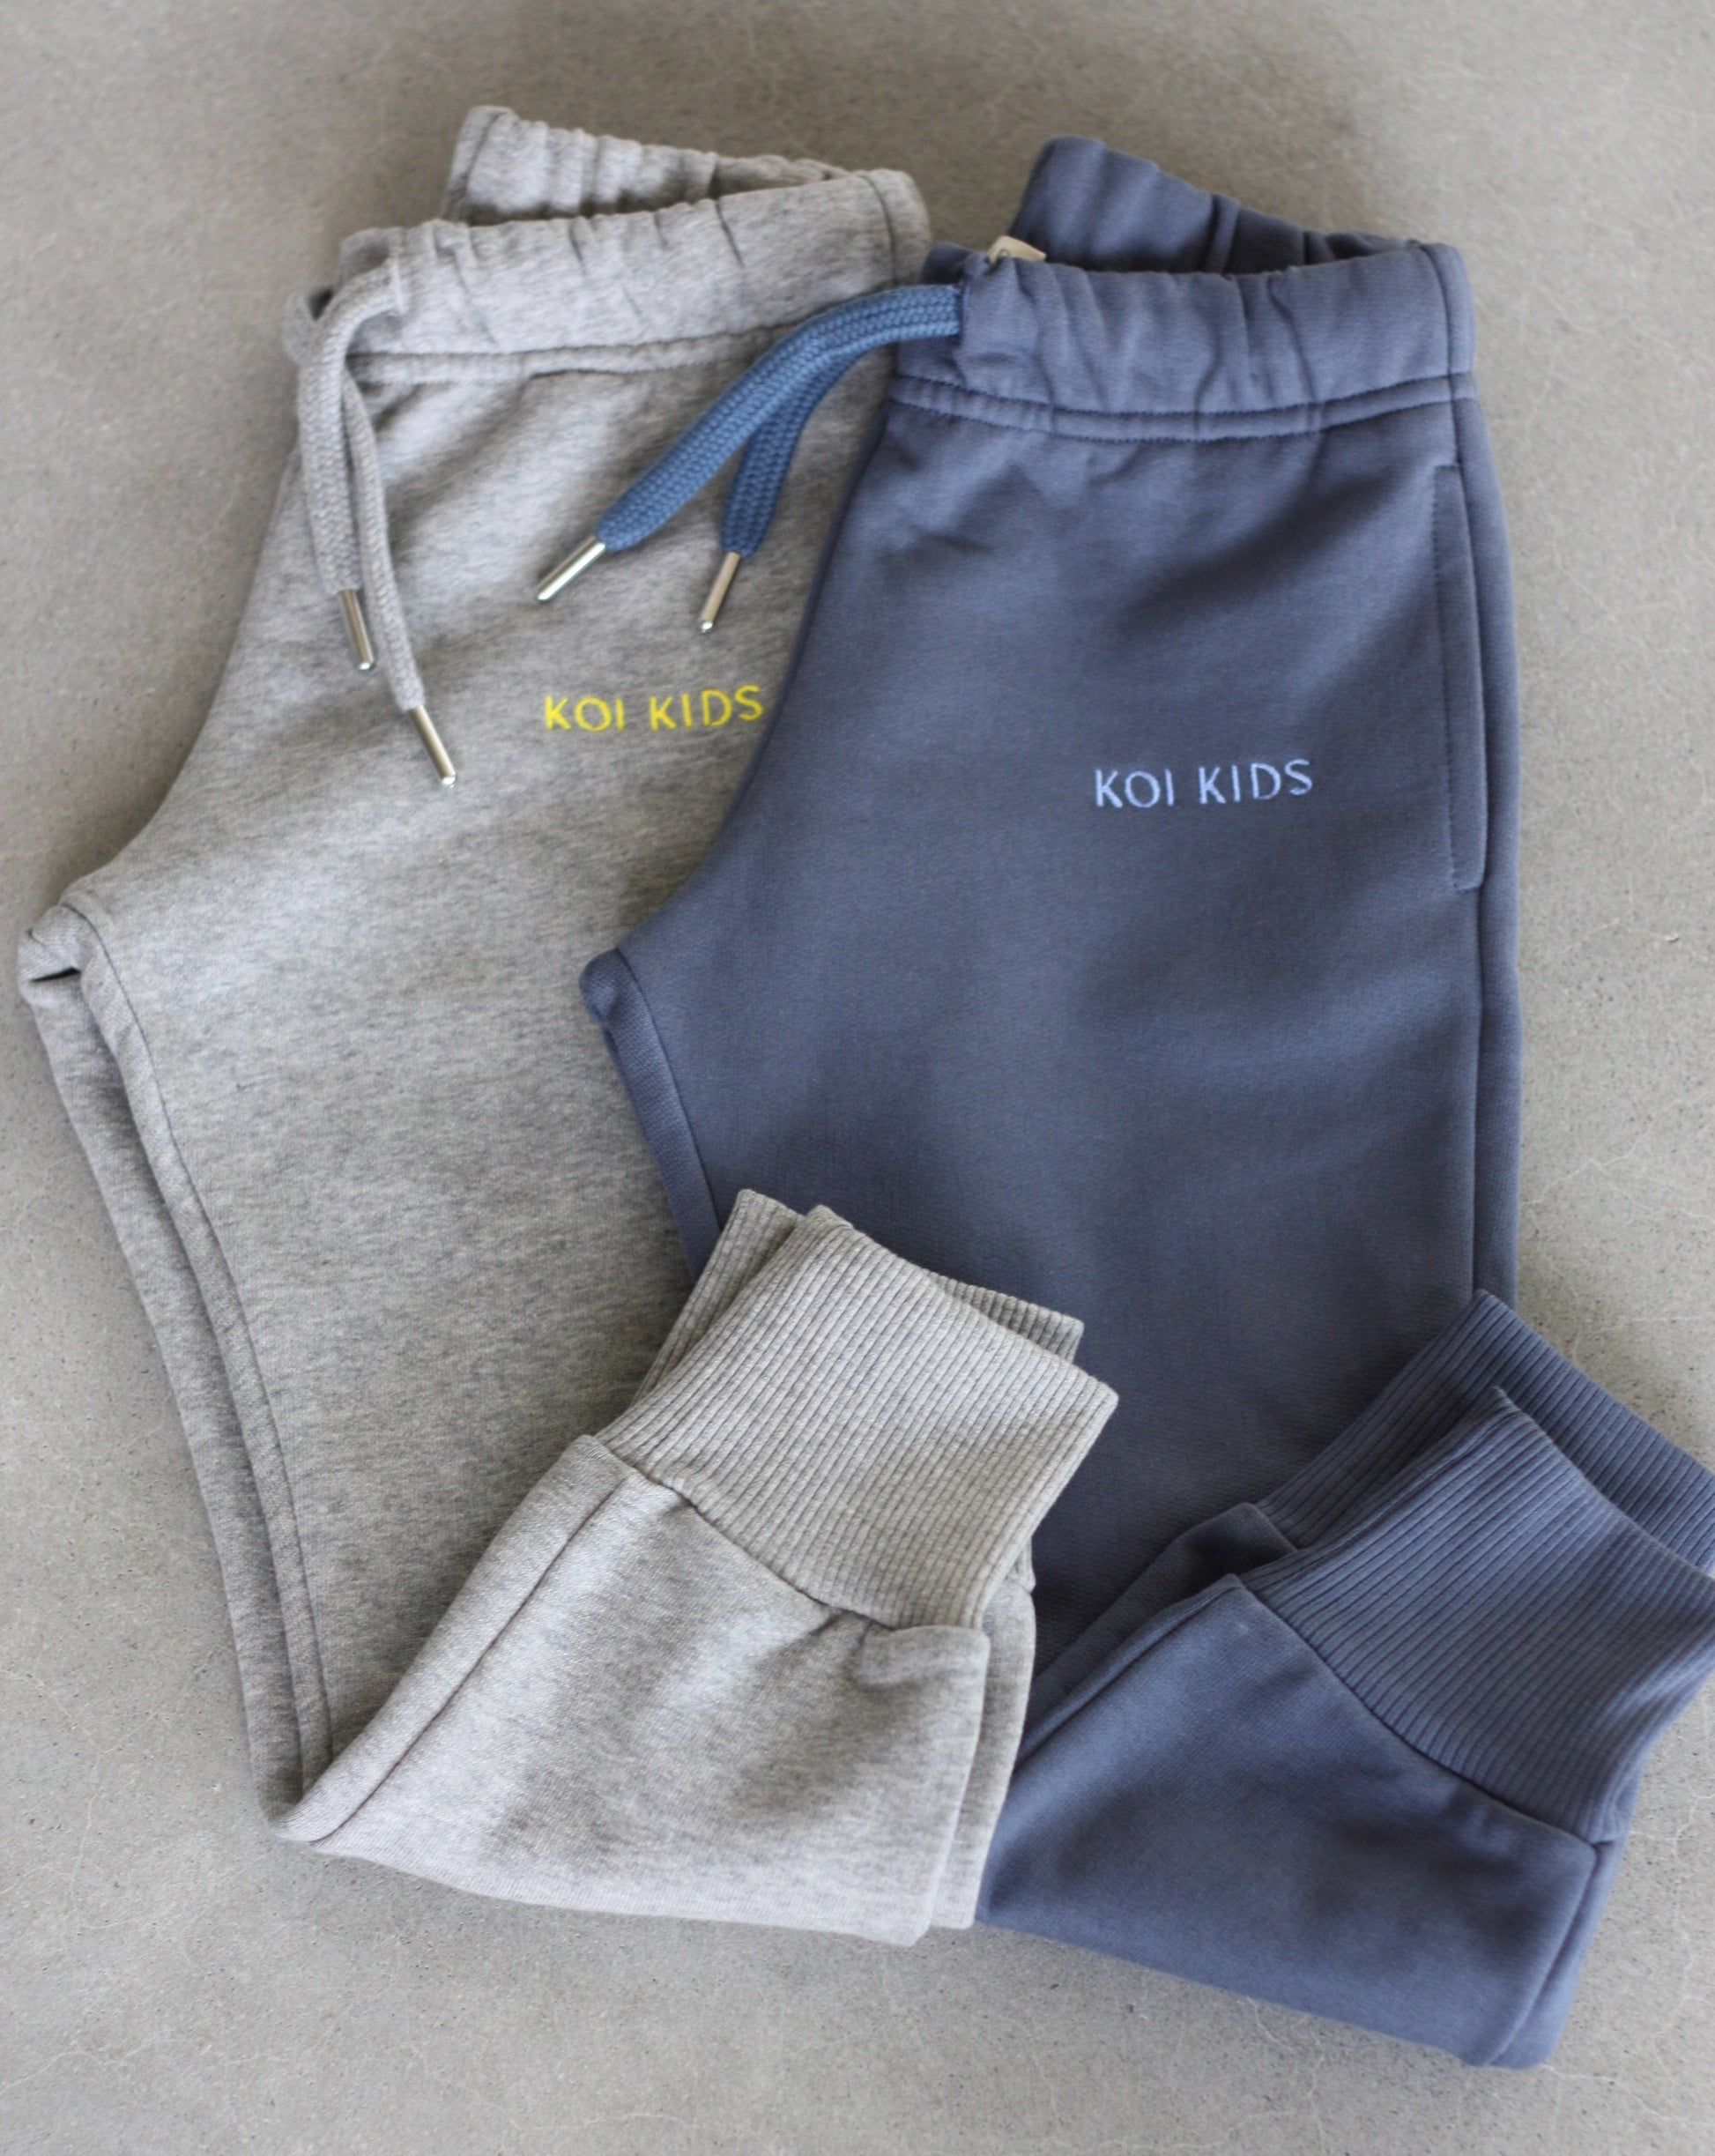 Grey mélange and denim blue sweatpants with a drawstring elasticated waist, logo embroidery, side pockets and ribbed cuffs.